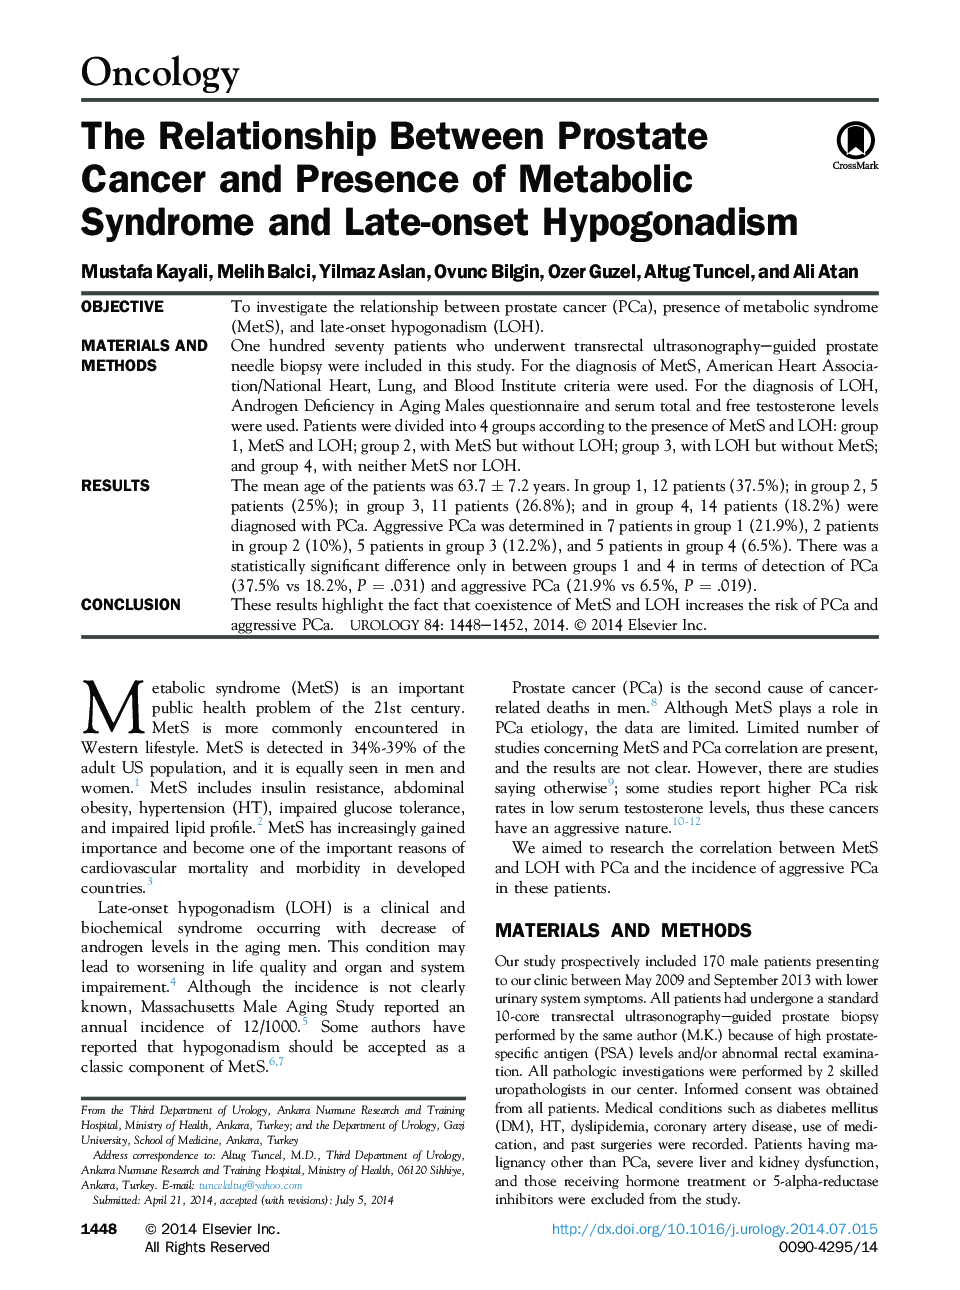 The Relationship Between Prostate Cancer and Presence of Metabolic Syndrome and Late-onset Hypogonadism